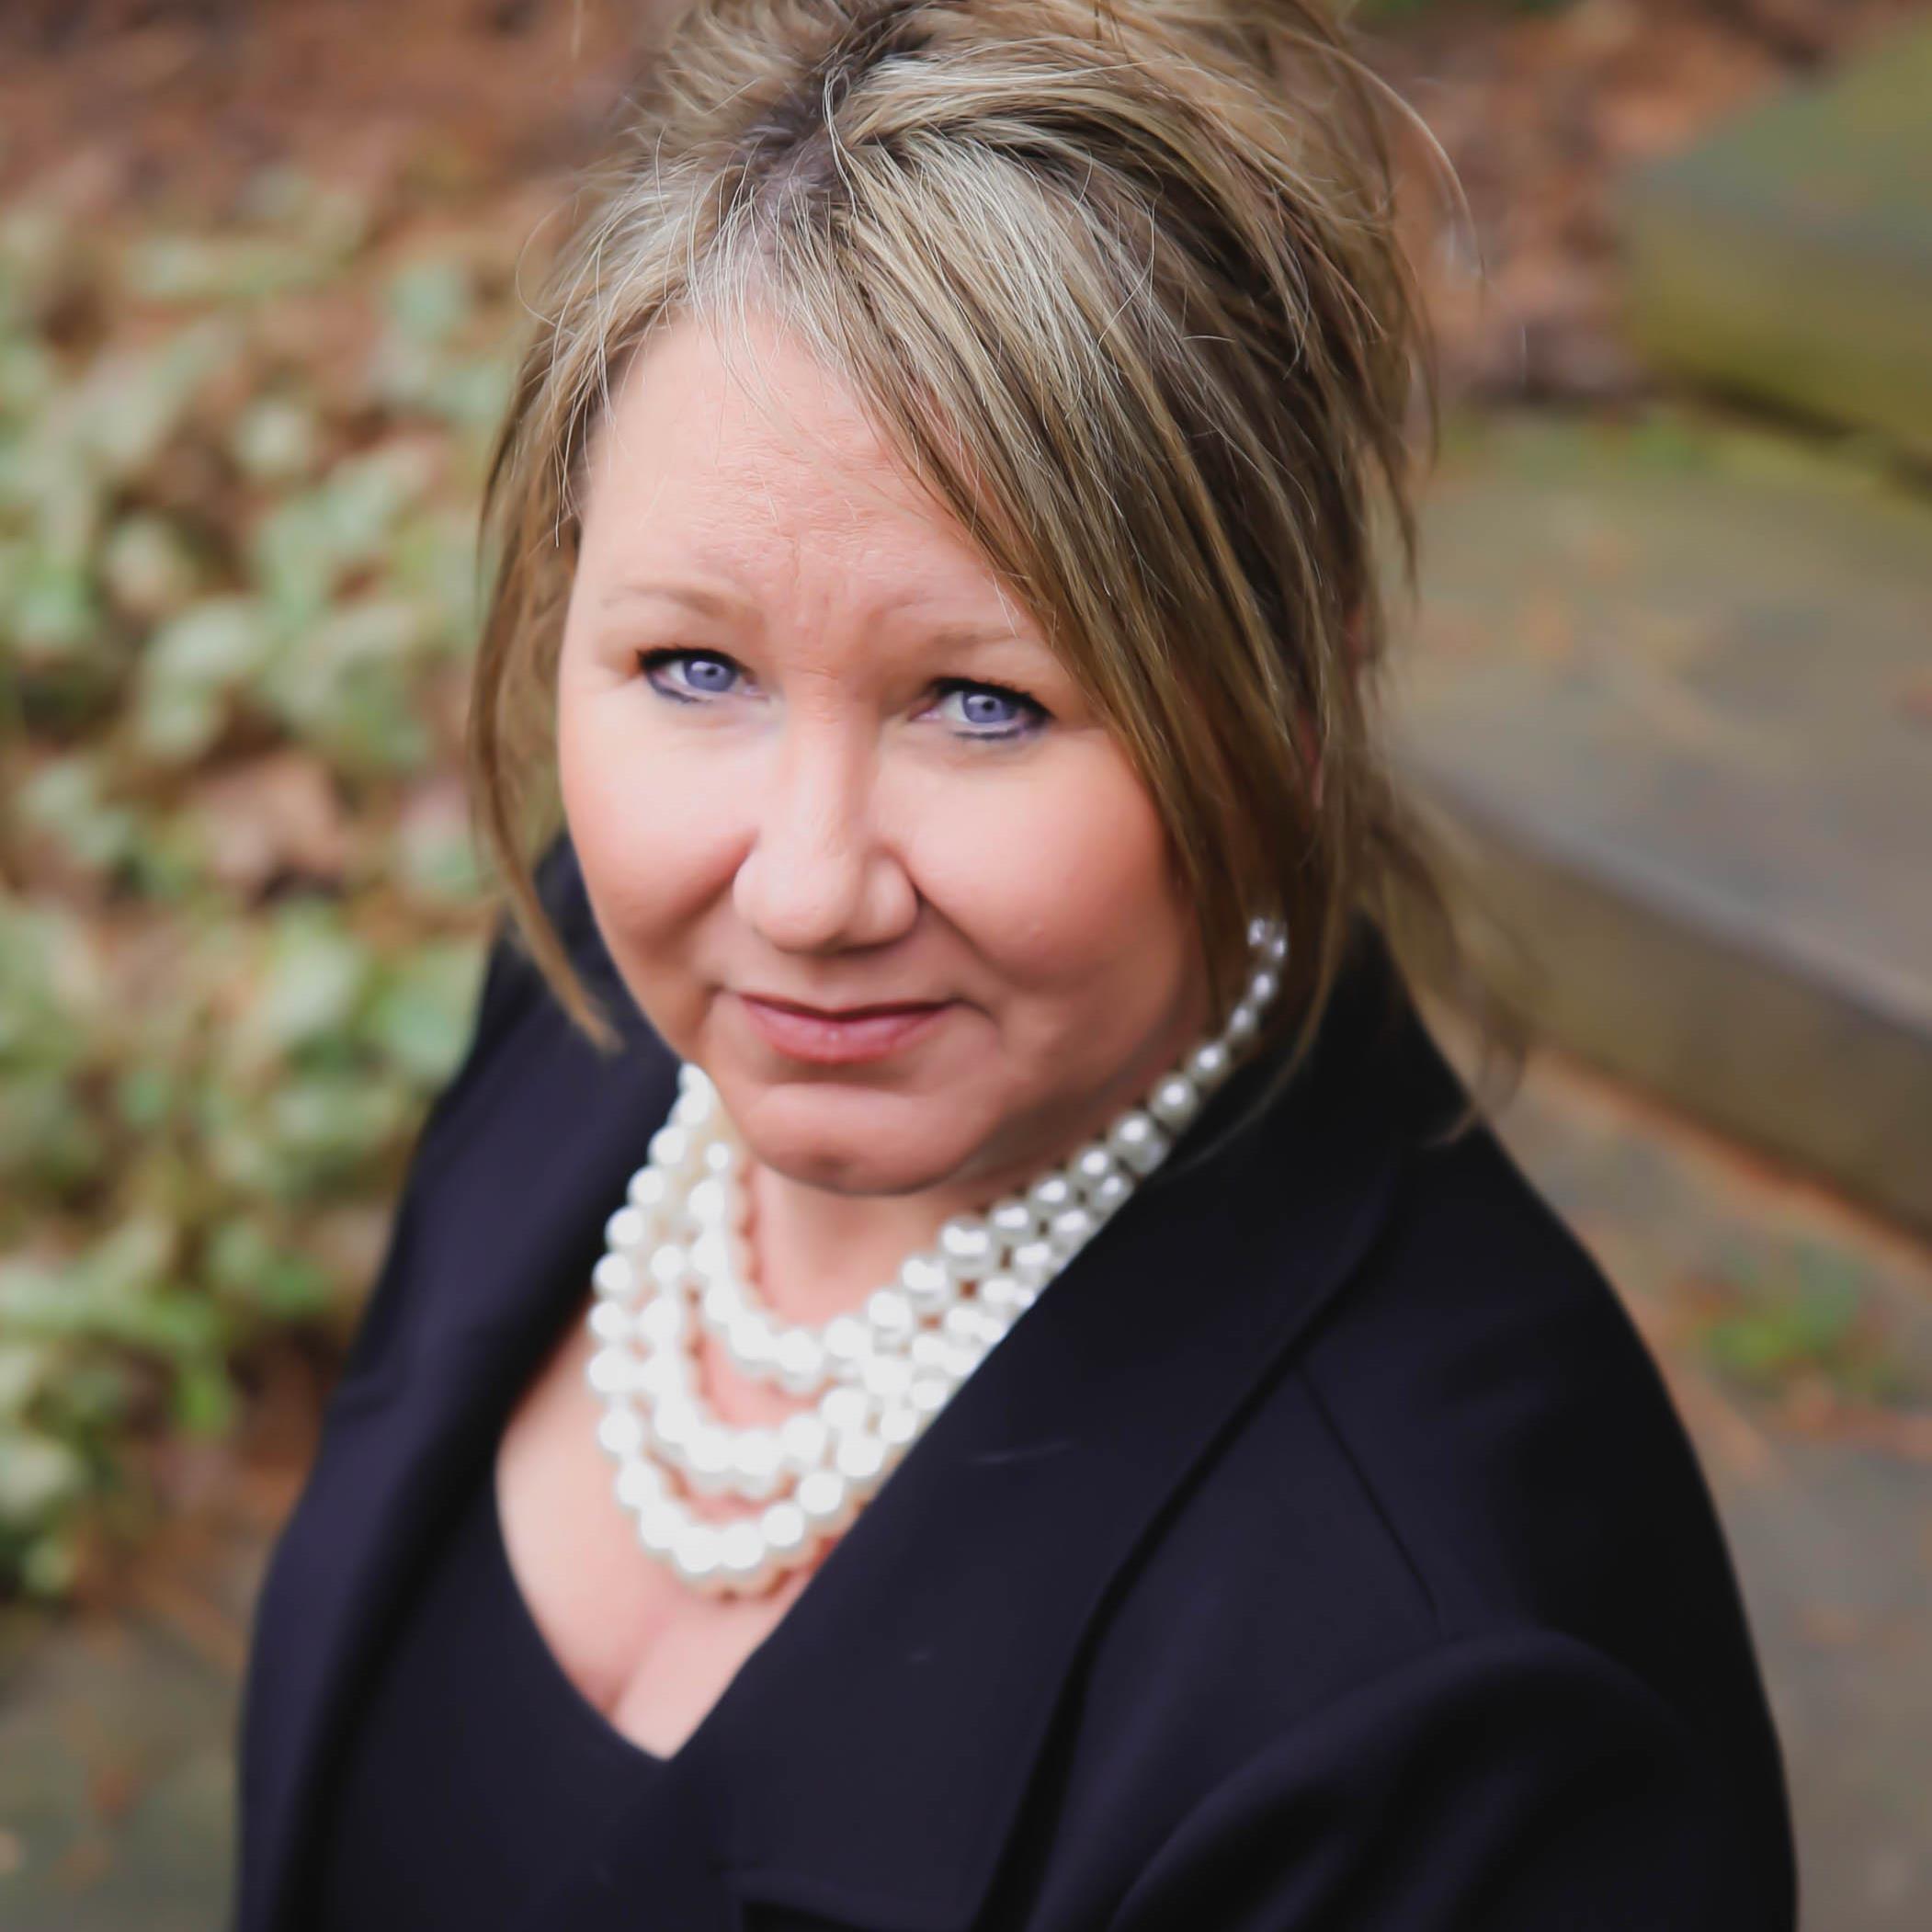 With over 18 years of real estate experience, Katherine's knowledge and expertise will make the process of selling or buying your home a success!